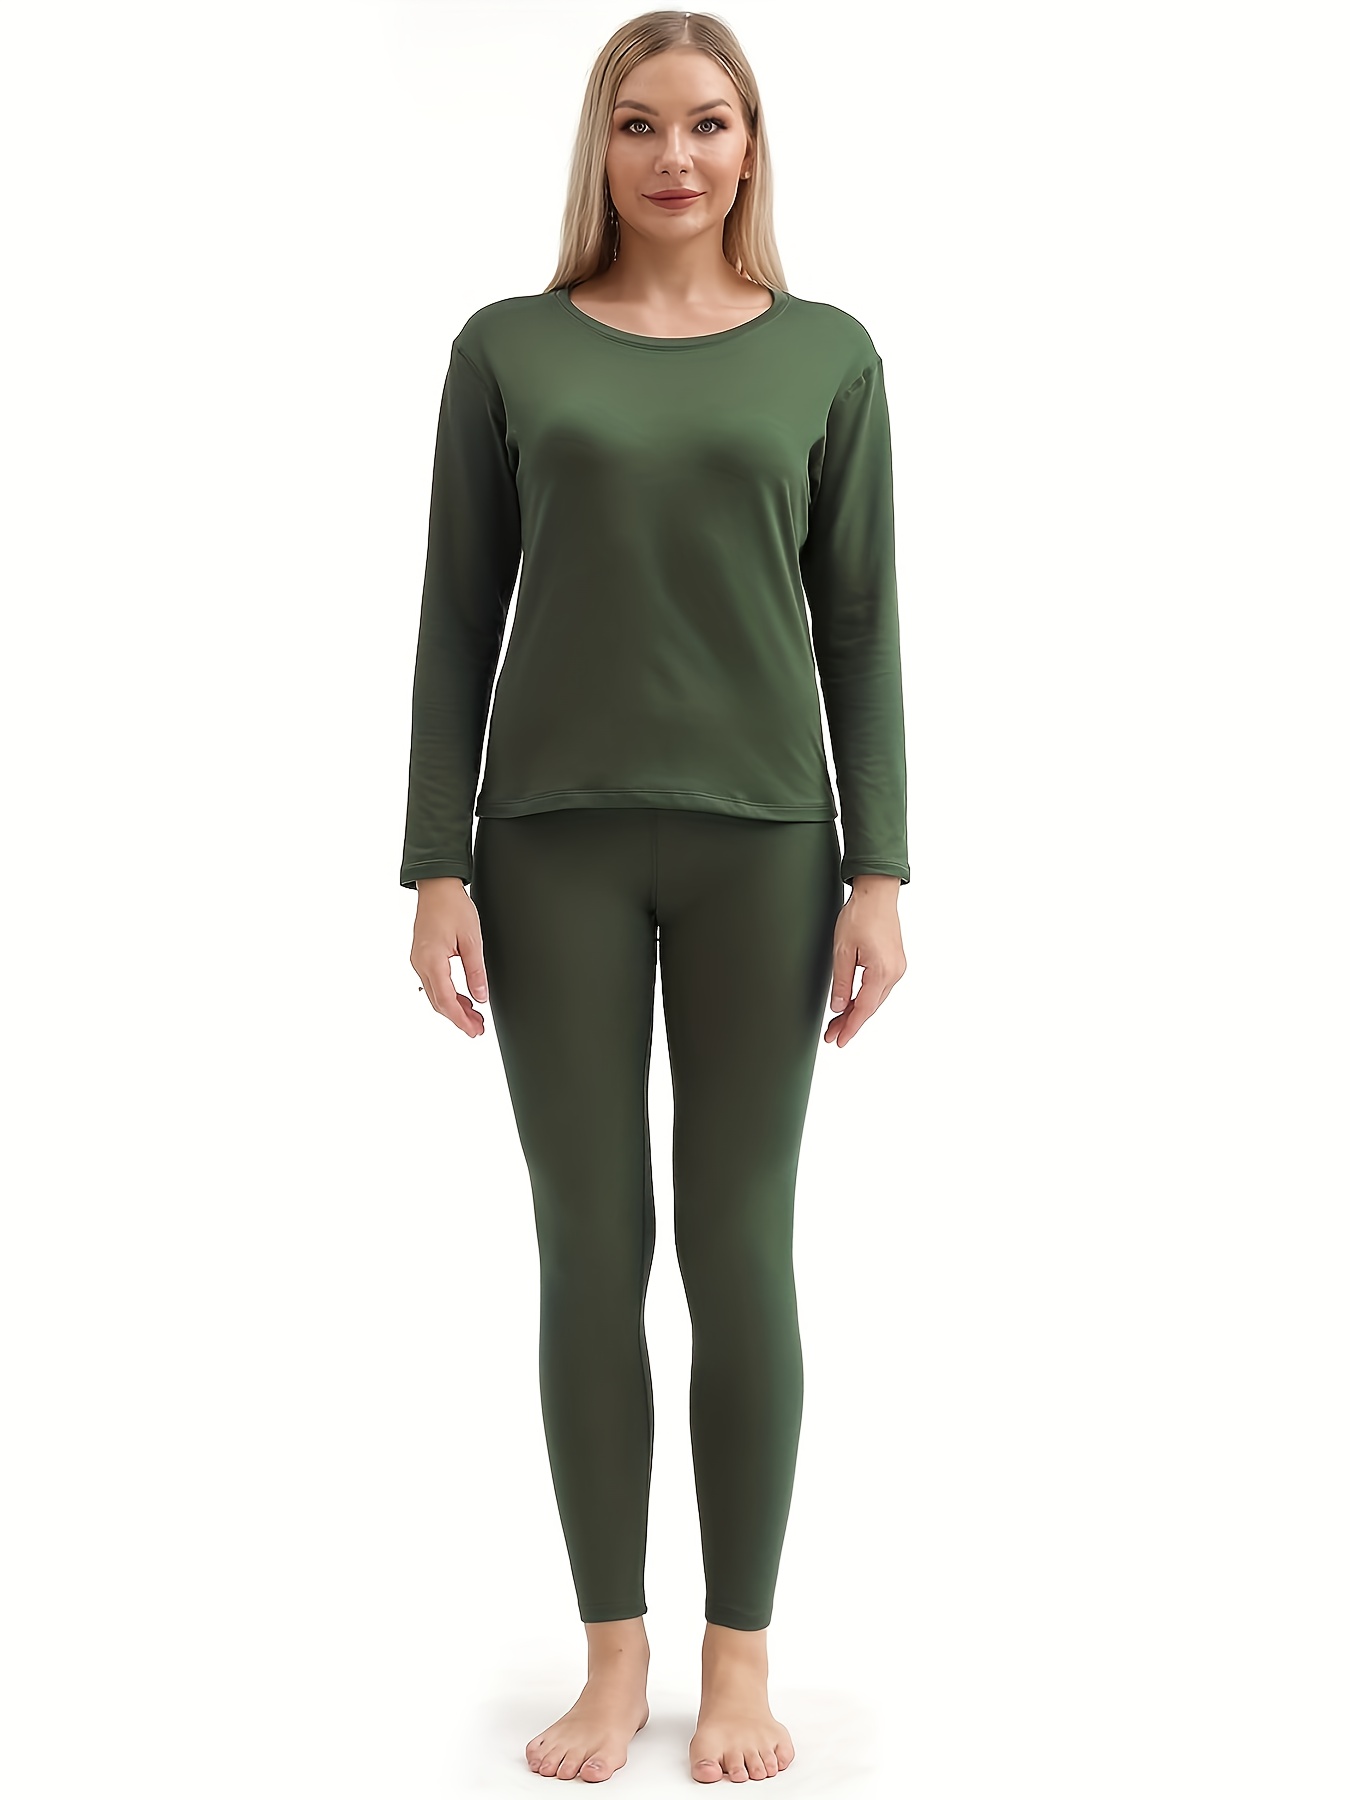  Thermal Underwear For Women, Long Johns Ski Cold Weather  Gear Set Base Layer Warm Winter Top And Bottom Running Green Small